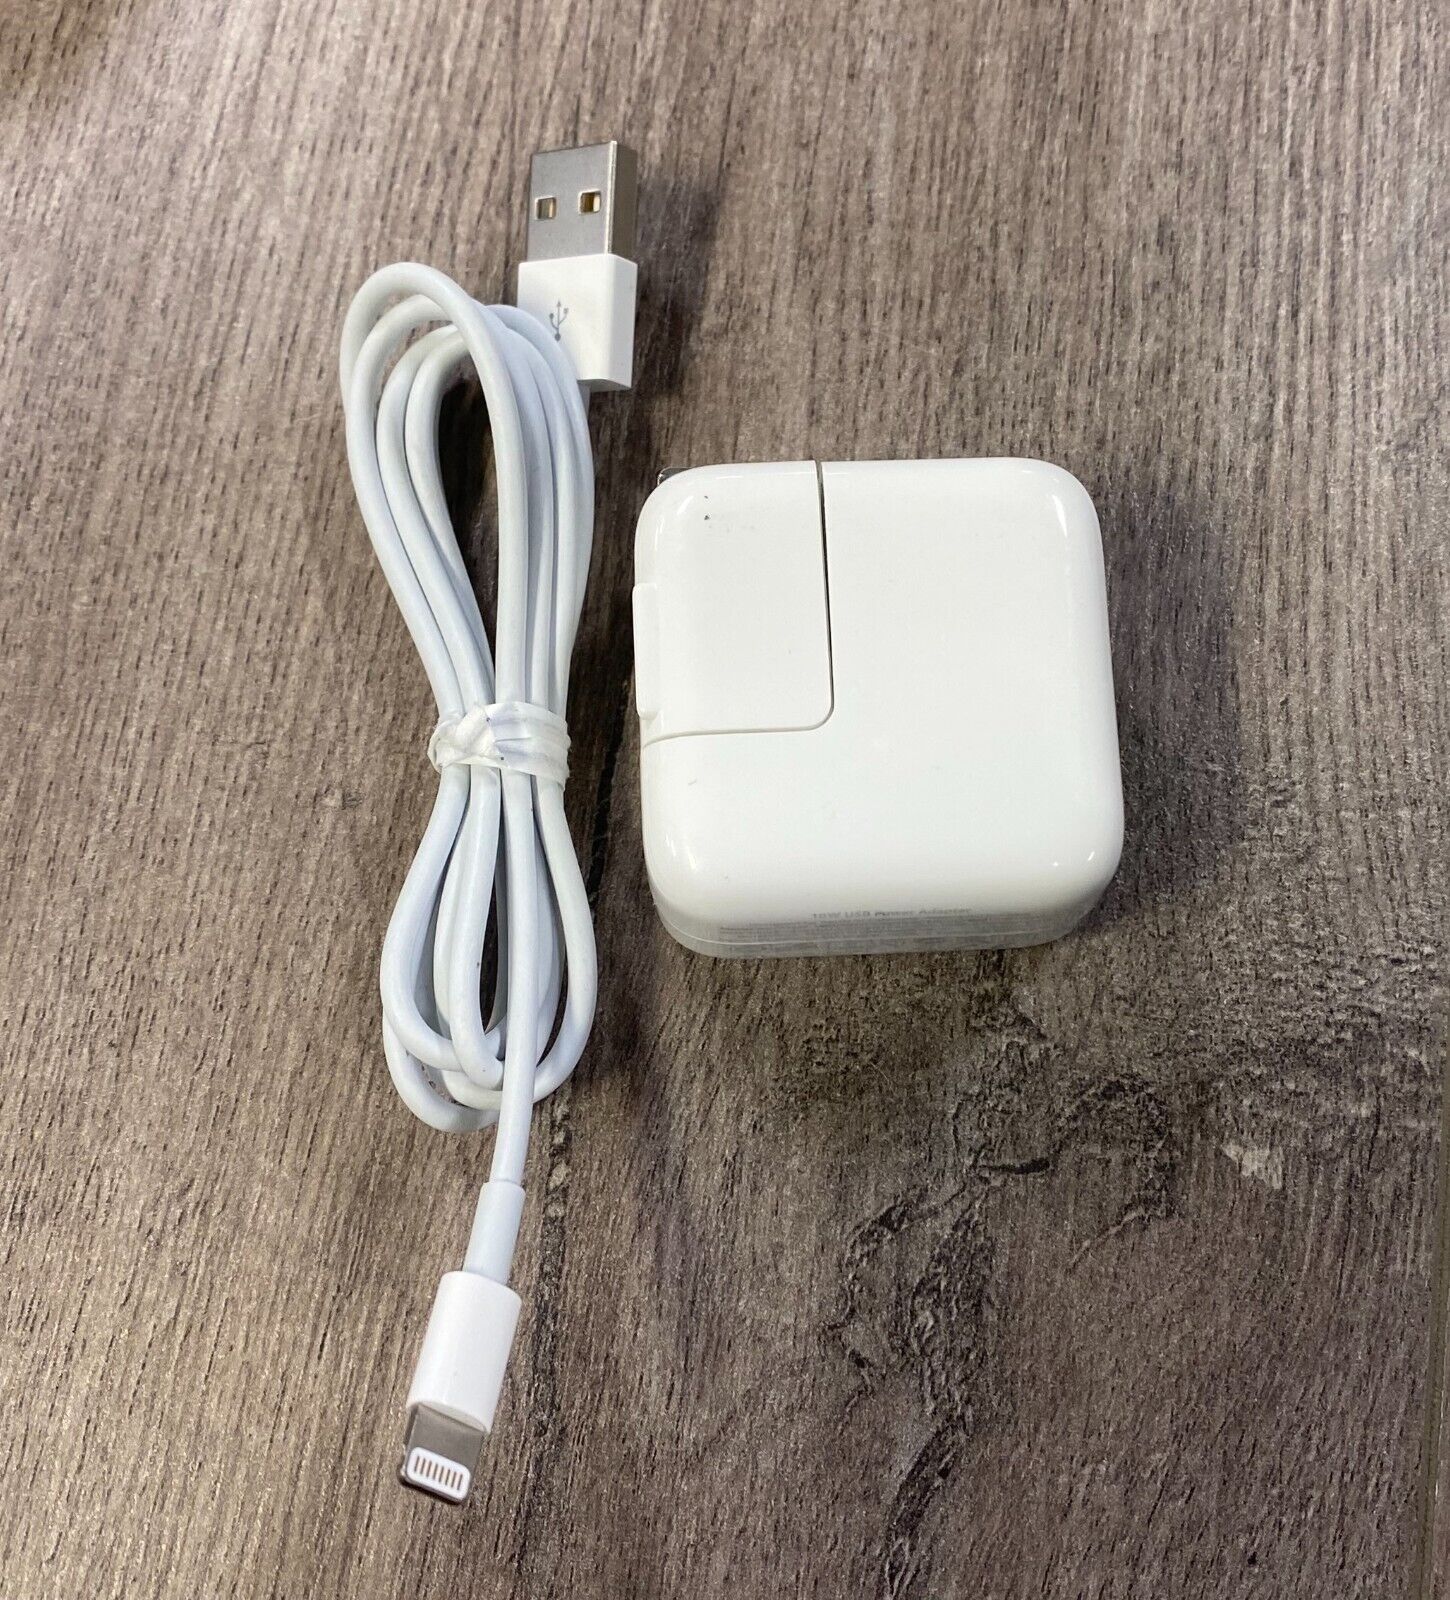 Genuine OEM Apple 10w USB Wall Charger Adapter iPhone iPad with Lightning cable